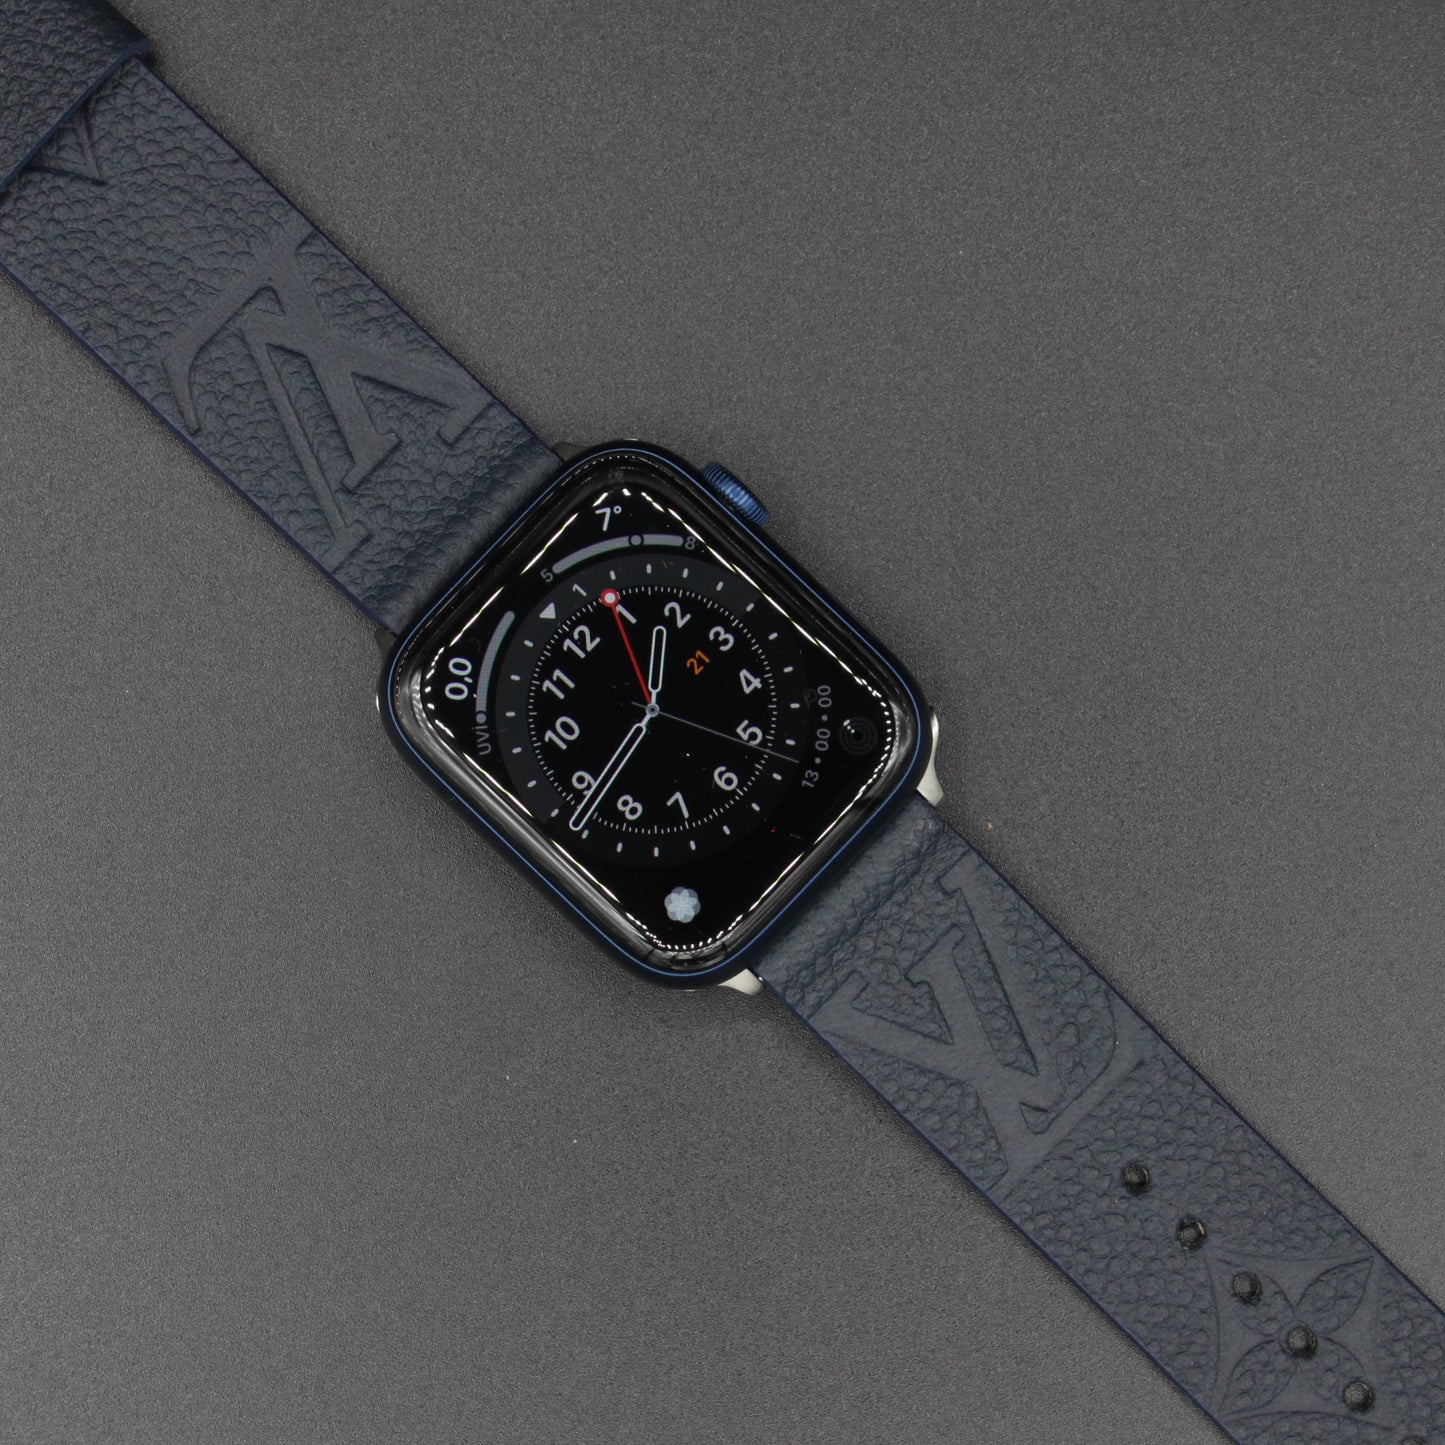 Authentic Apple Watch Strap ; Navy blue